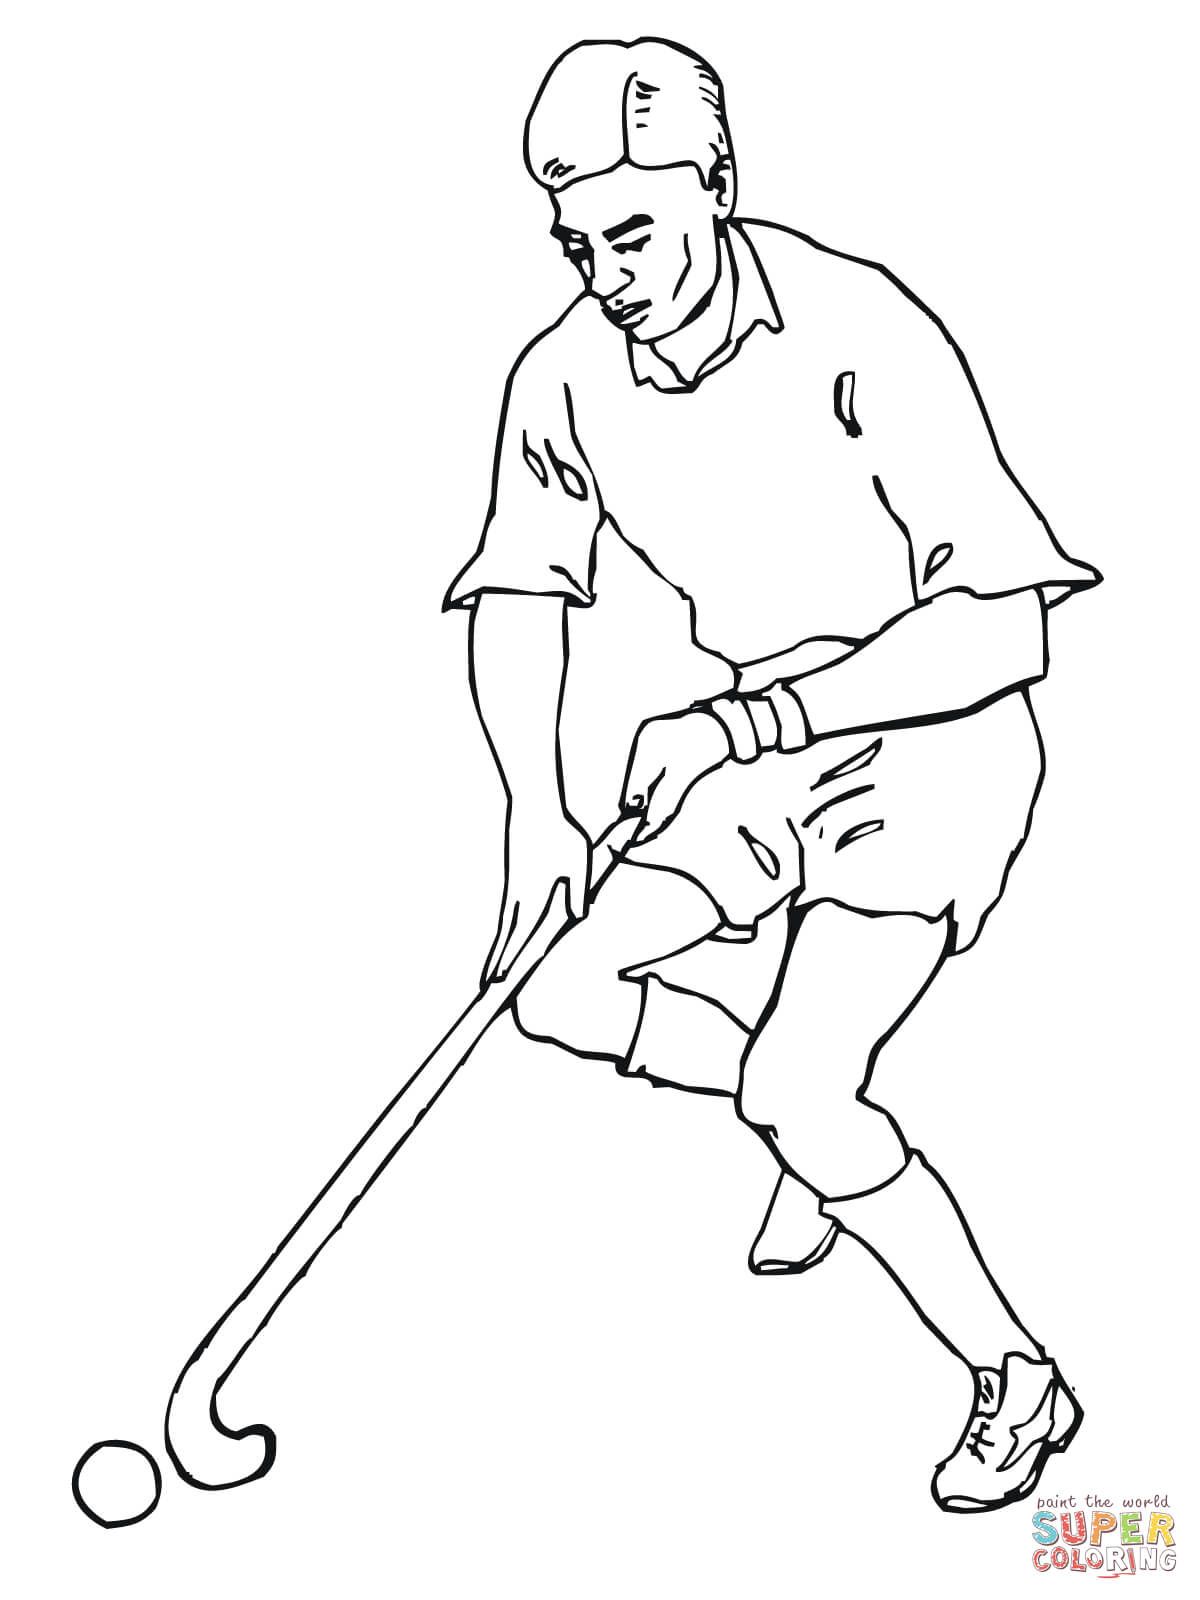 Field Hockey Vector Images over 7600